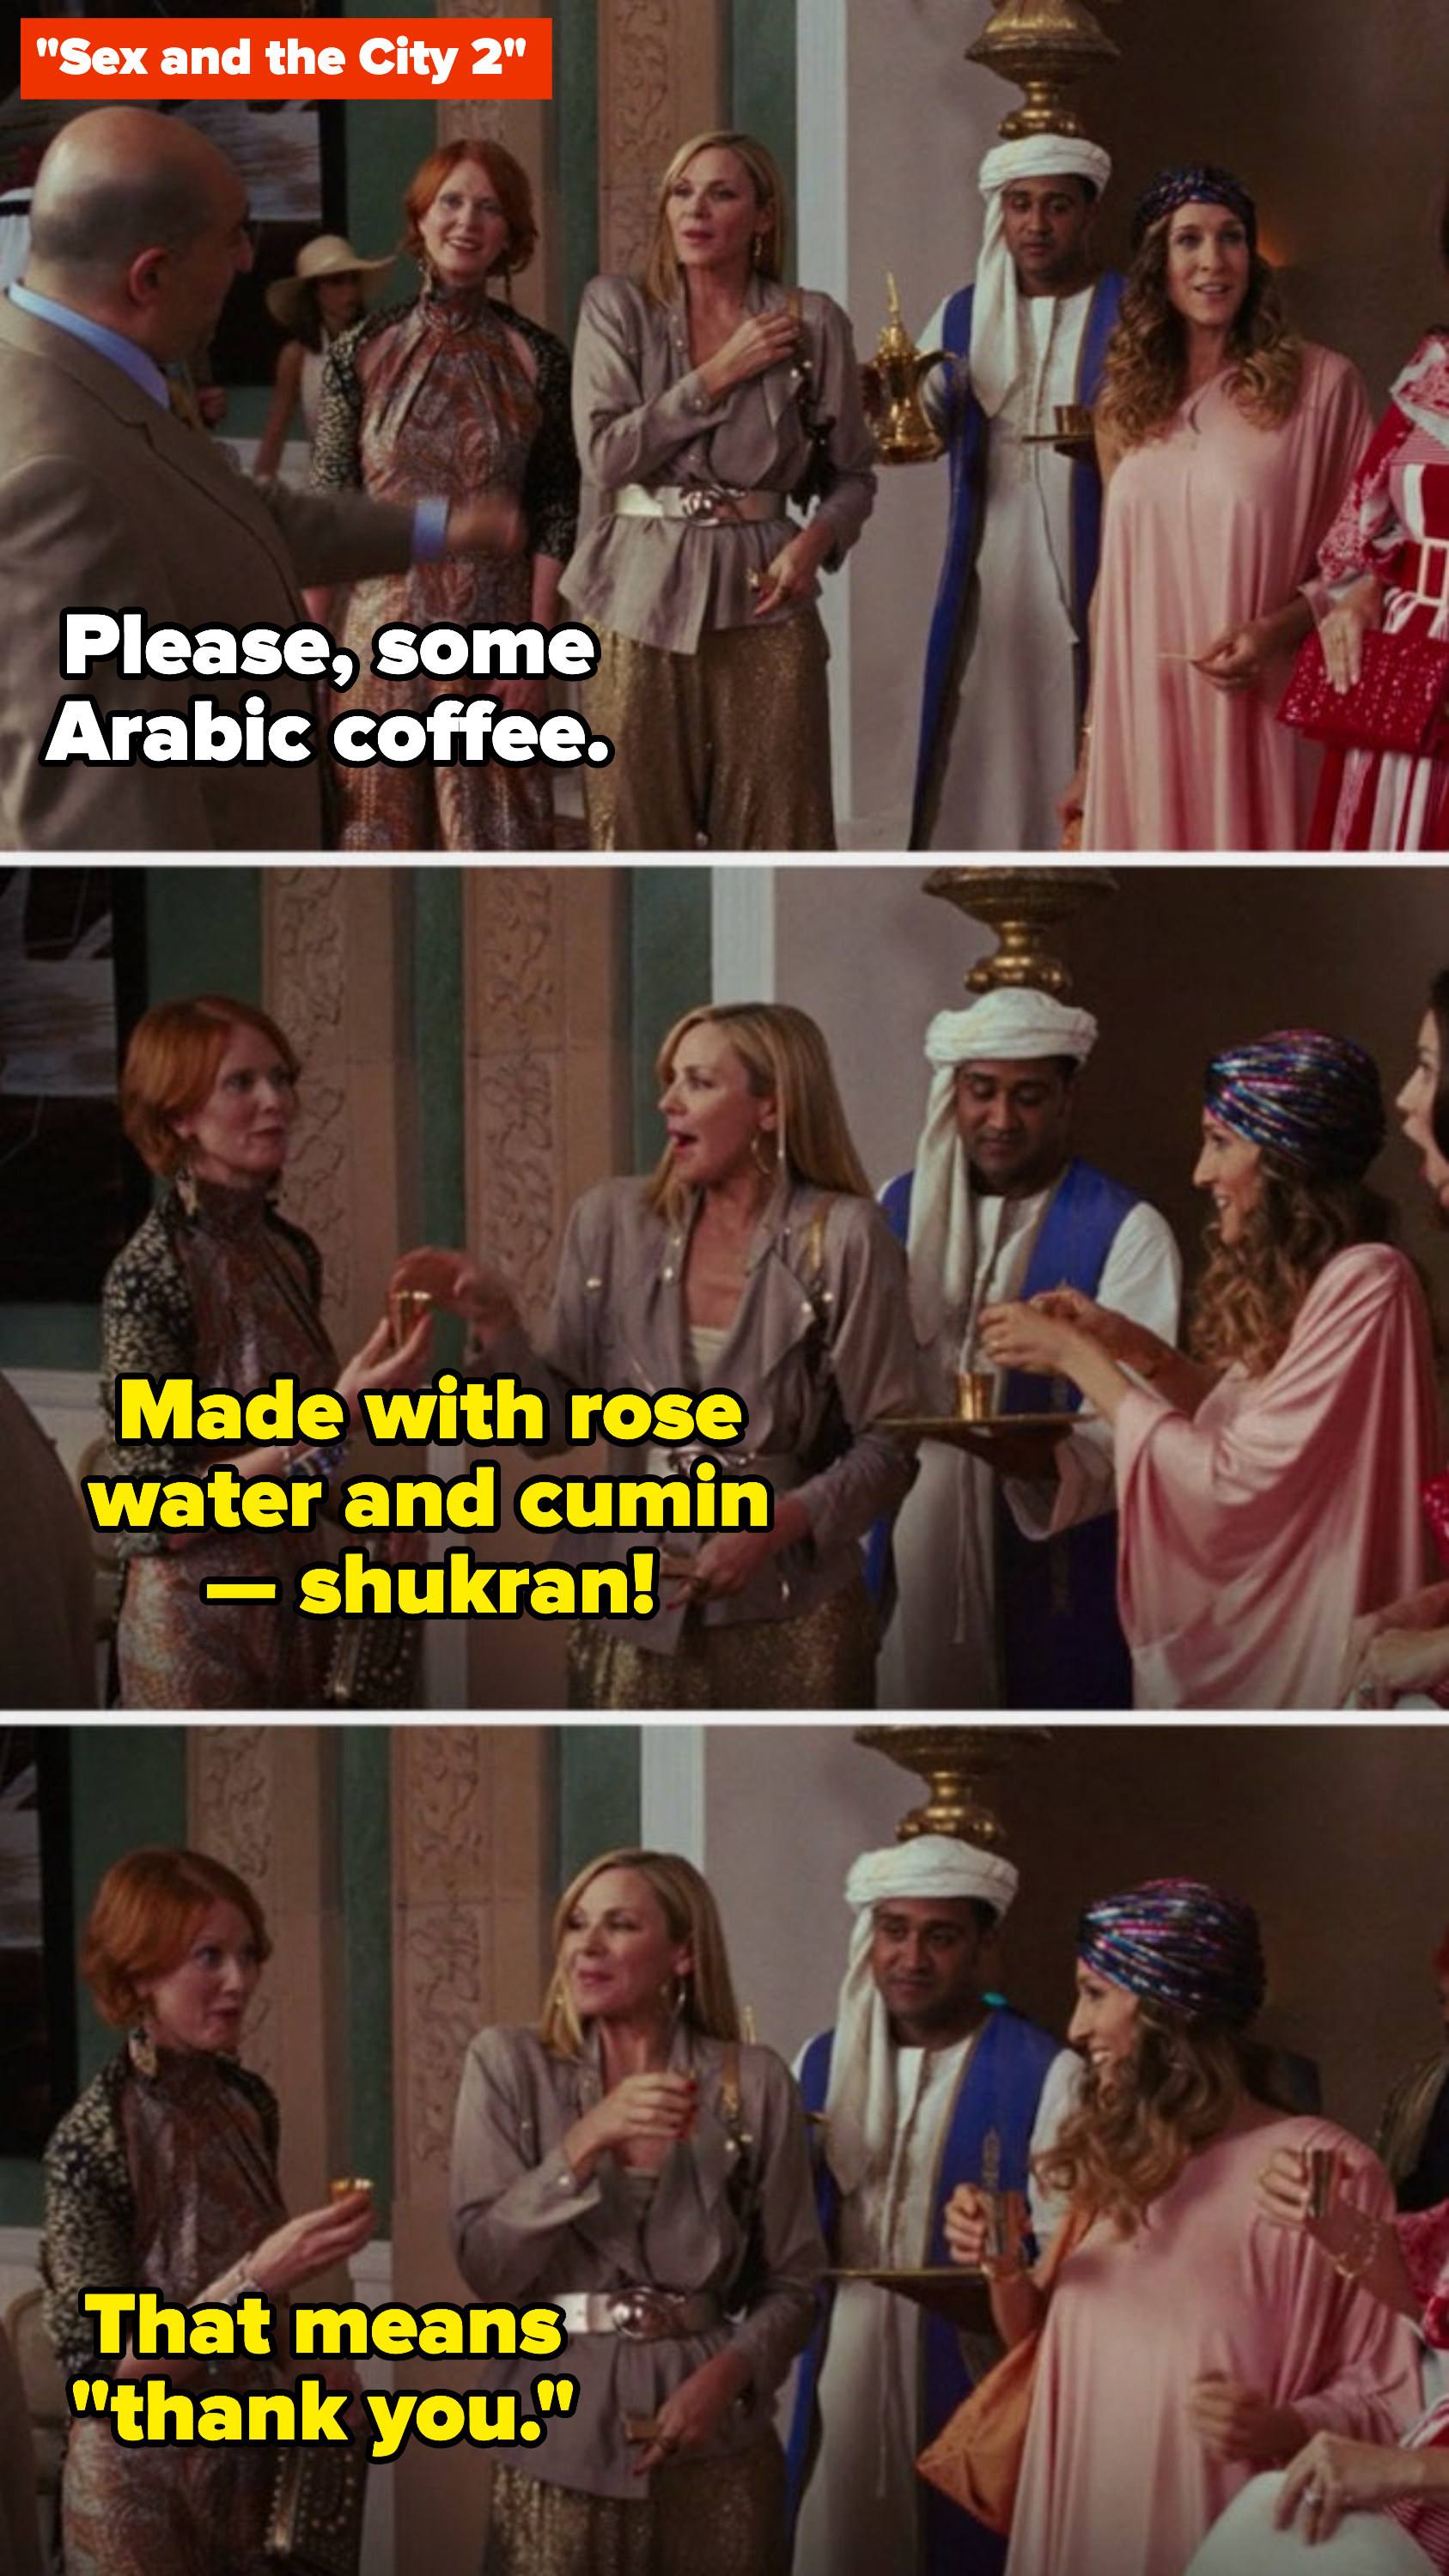 Miranda explaining to Carrie, Charlotte, and Samantha that Arabic coffee is made of rose water and cumin in &quot;Sex and the City 2&quot;